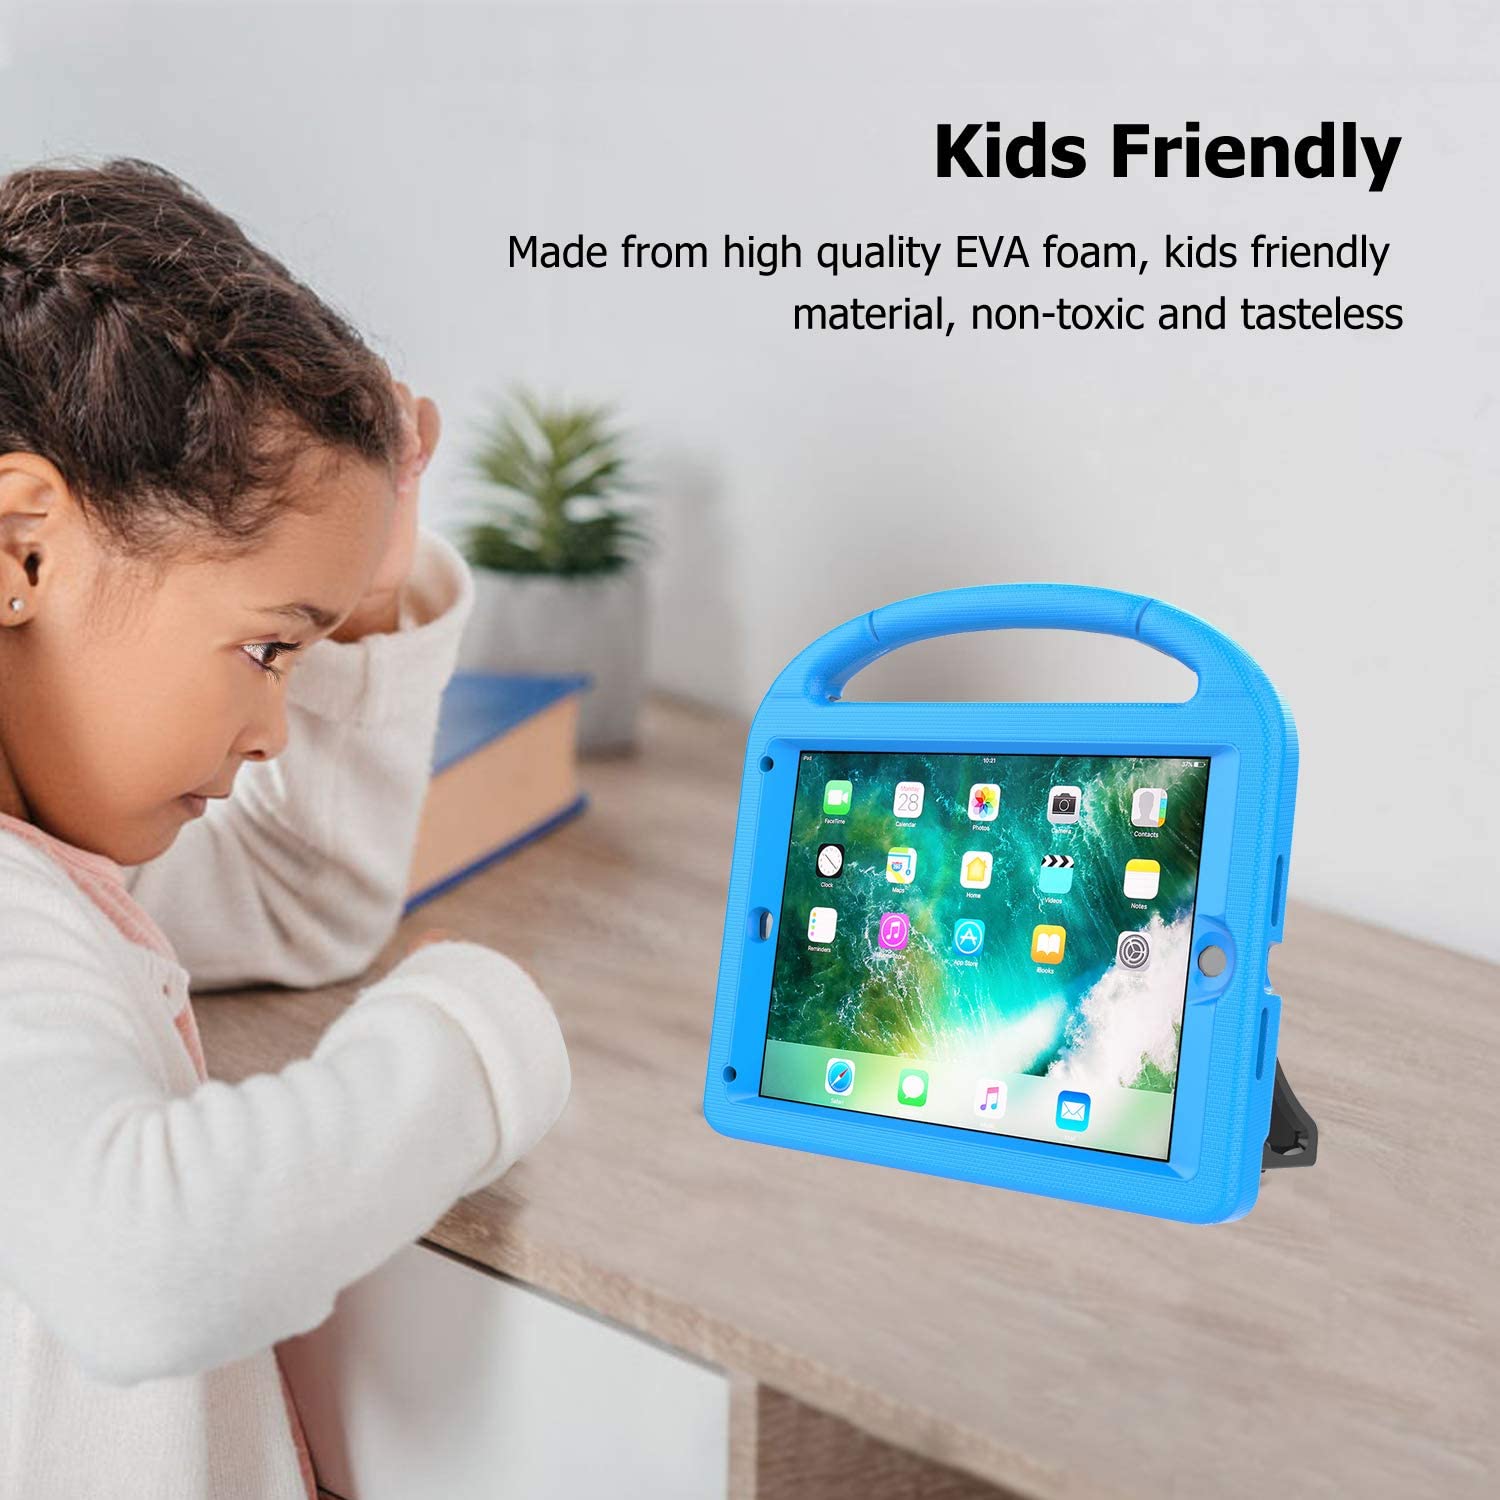 LEDNICEKER Kids Case for New iPad 9.7 2018/2017 - Built-in Screen Protector Light Weight Shock Proof - Blue - e4cents